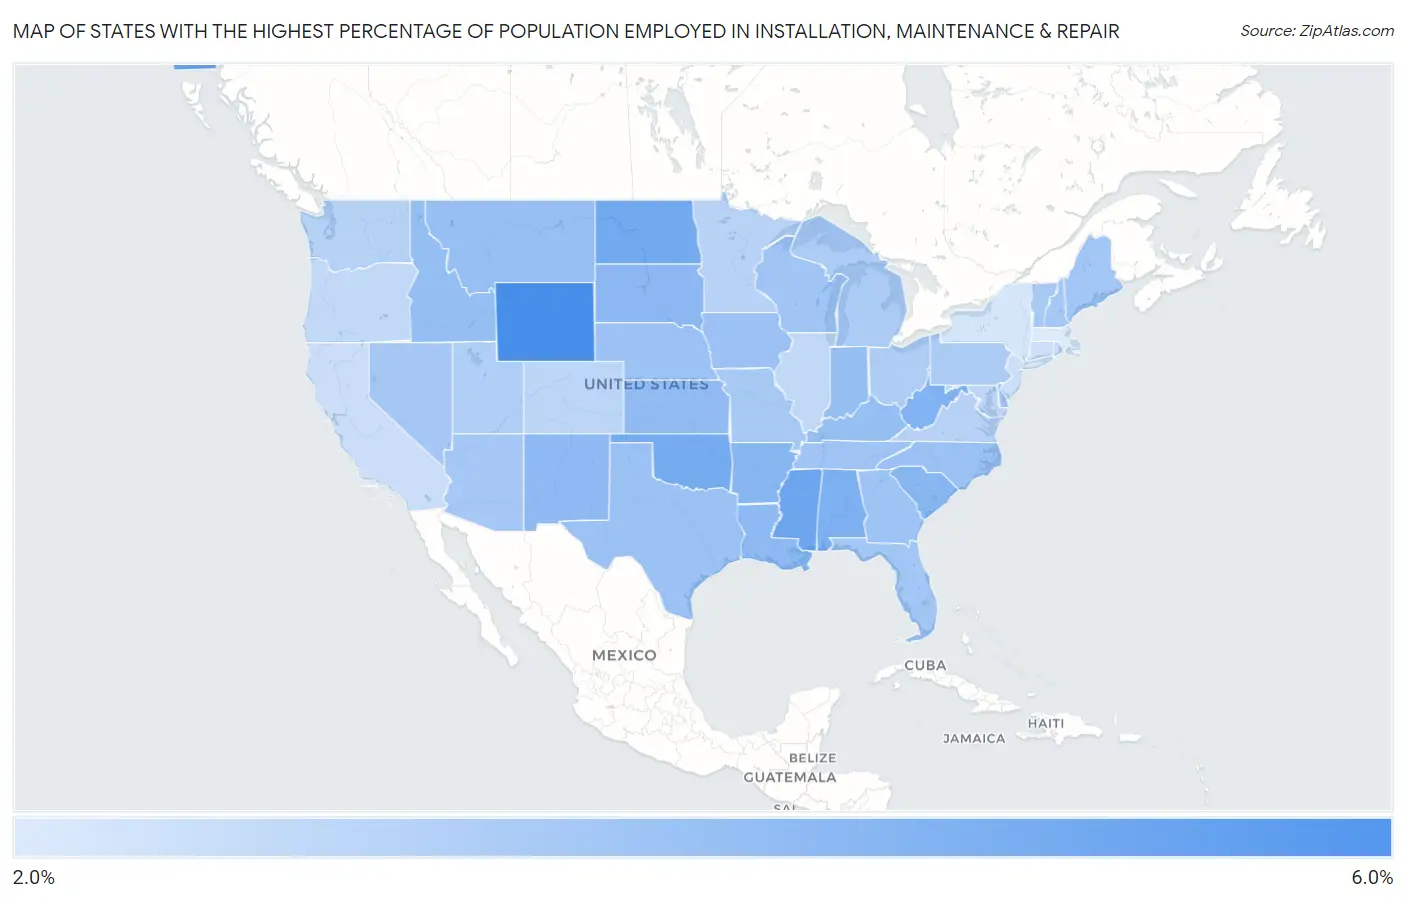 States with the Highest Percentage of Population Employed in Installation, Maintenance & Repair in the United States Map